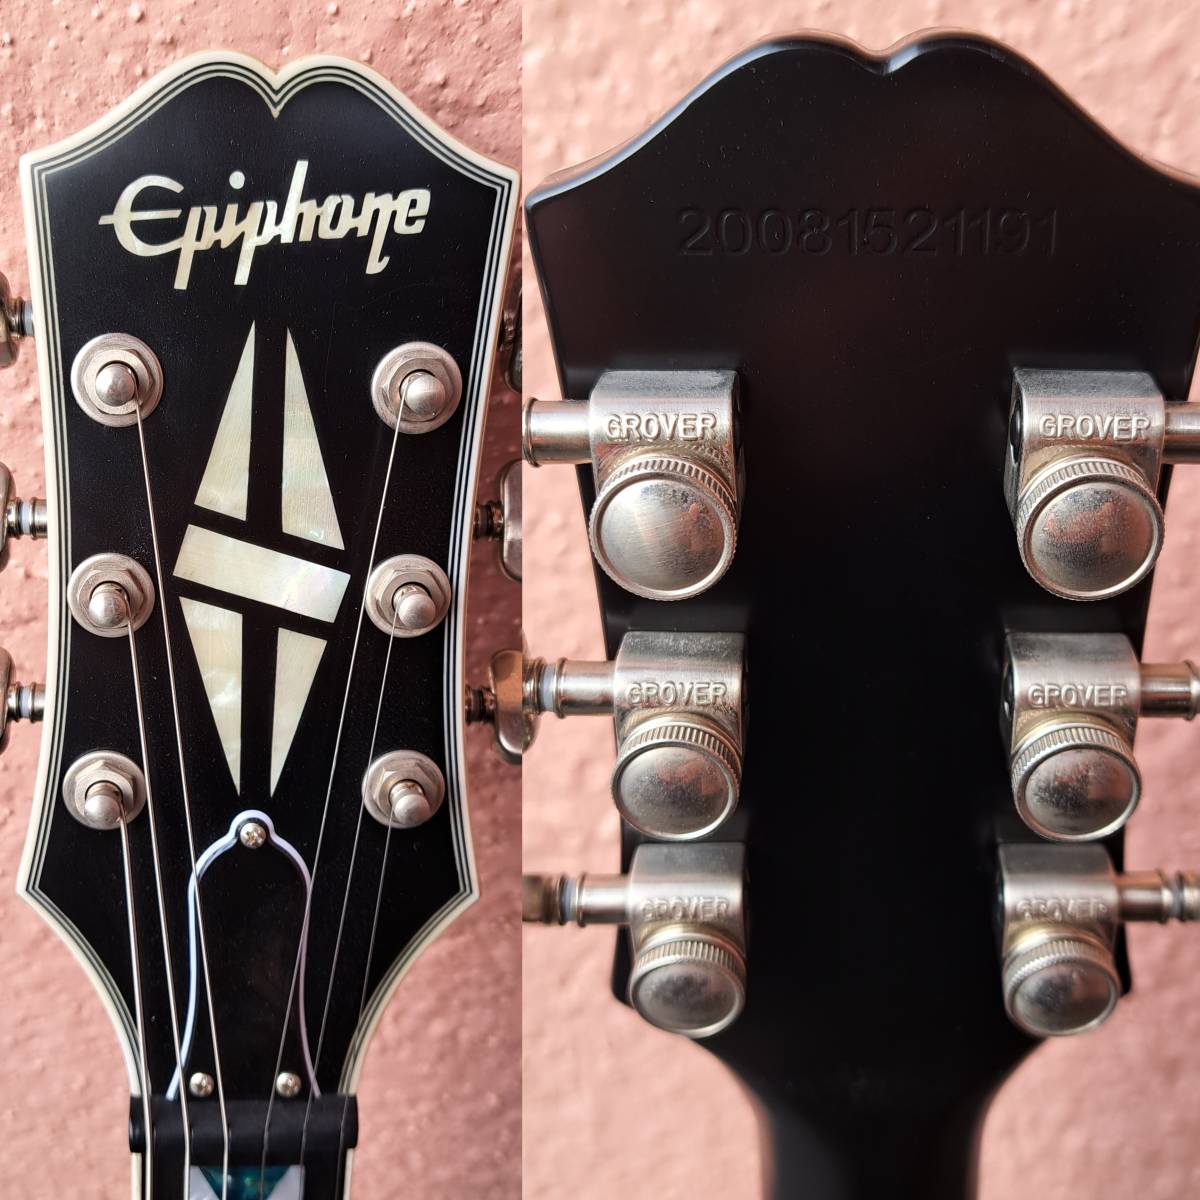 ■Epiphone SG Prophecy エピフォン プロフェシー 美品 Blue Tiger Aged Gloss 24F Ebony エボニー指板 Gibson ギブソン_画像8